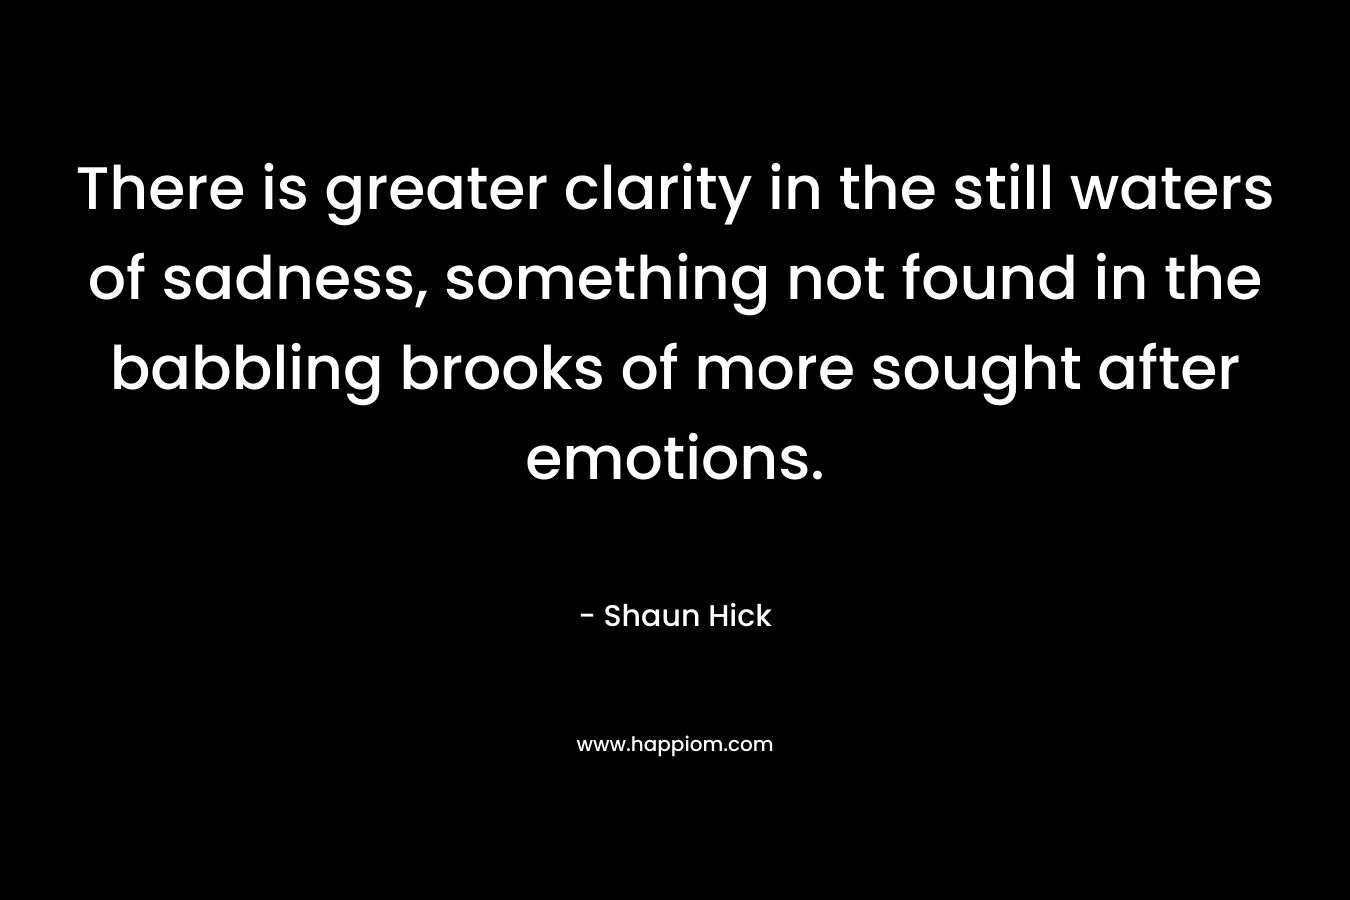 There is greater clarity in the still waters of sadness, something not found in the babbling brooks of more sought after emotions. – Shaun Hick